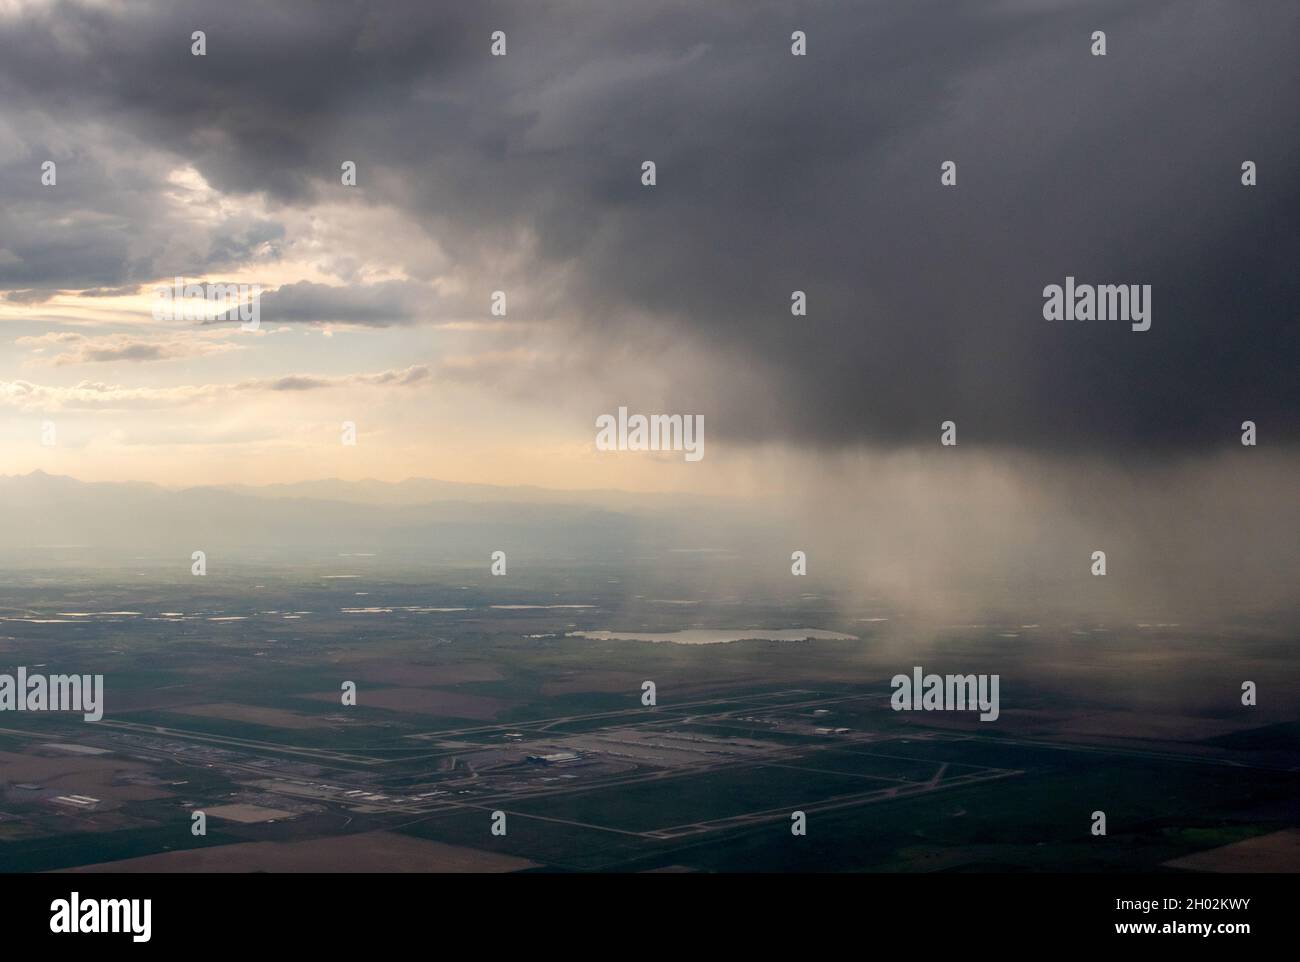 rain and storm clouds pour down over a city while viewed from the window of an airplane Stock Photo